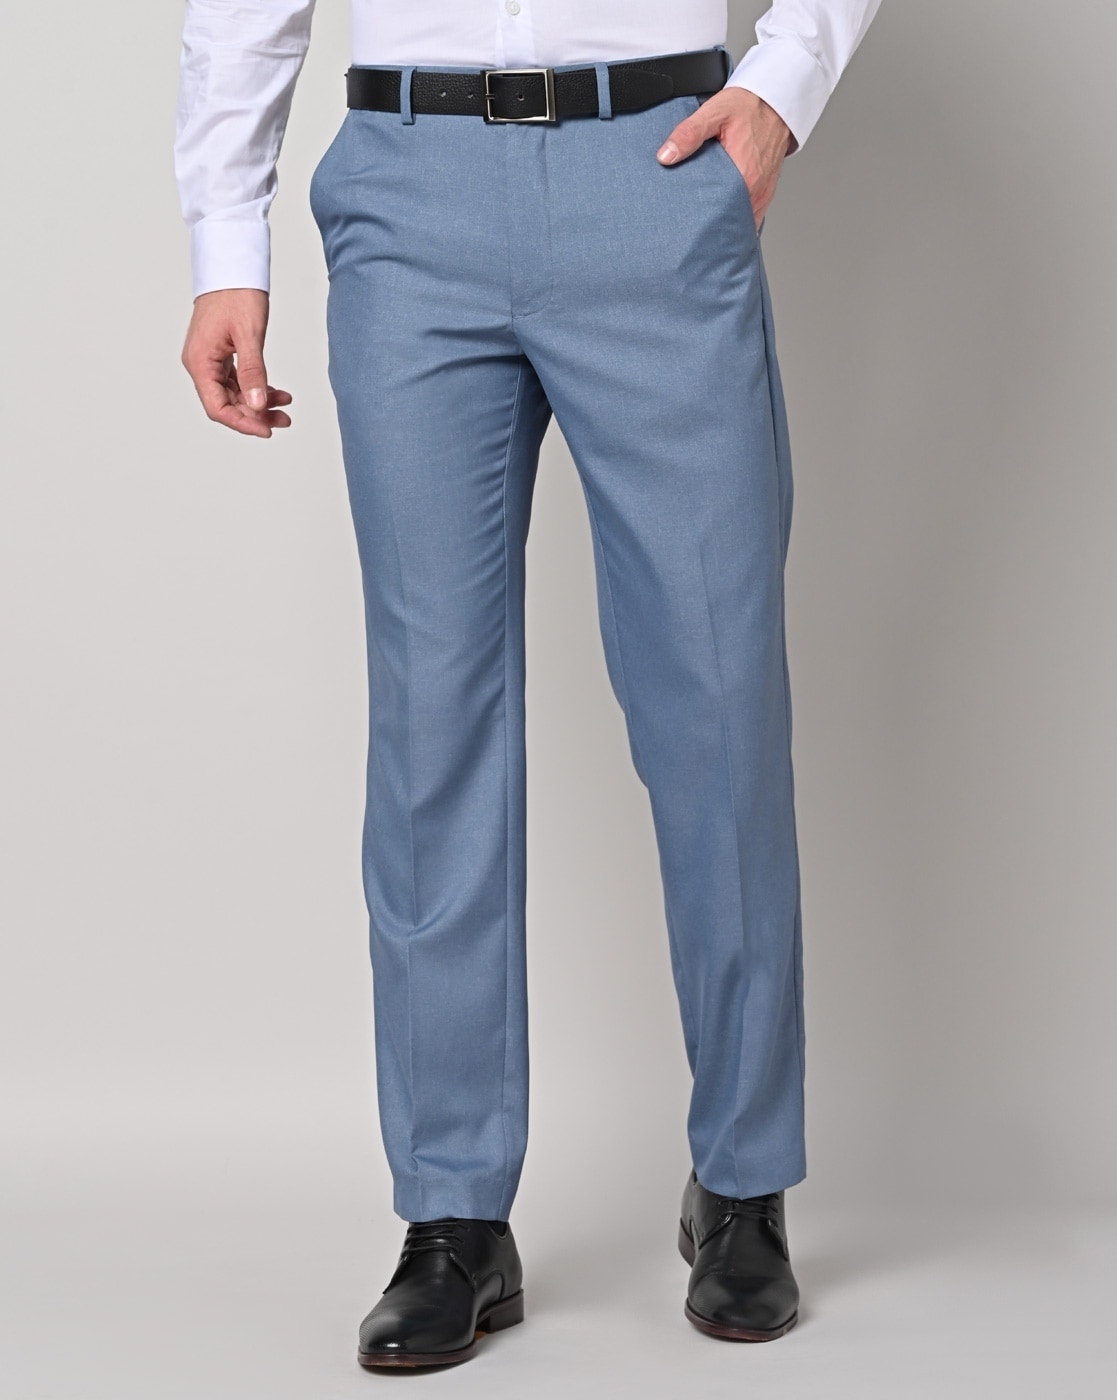 Latest Marks & Spencer Trousers & Pants arrivals - Men - 18 products |  FASHIOLA.in